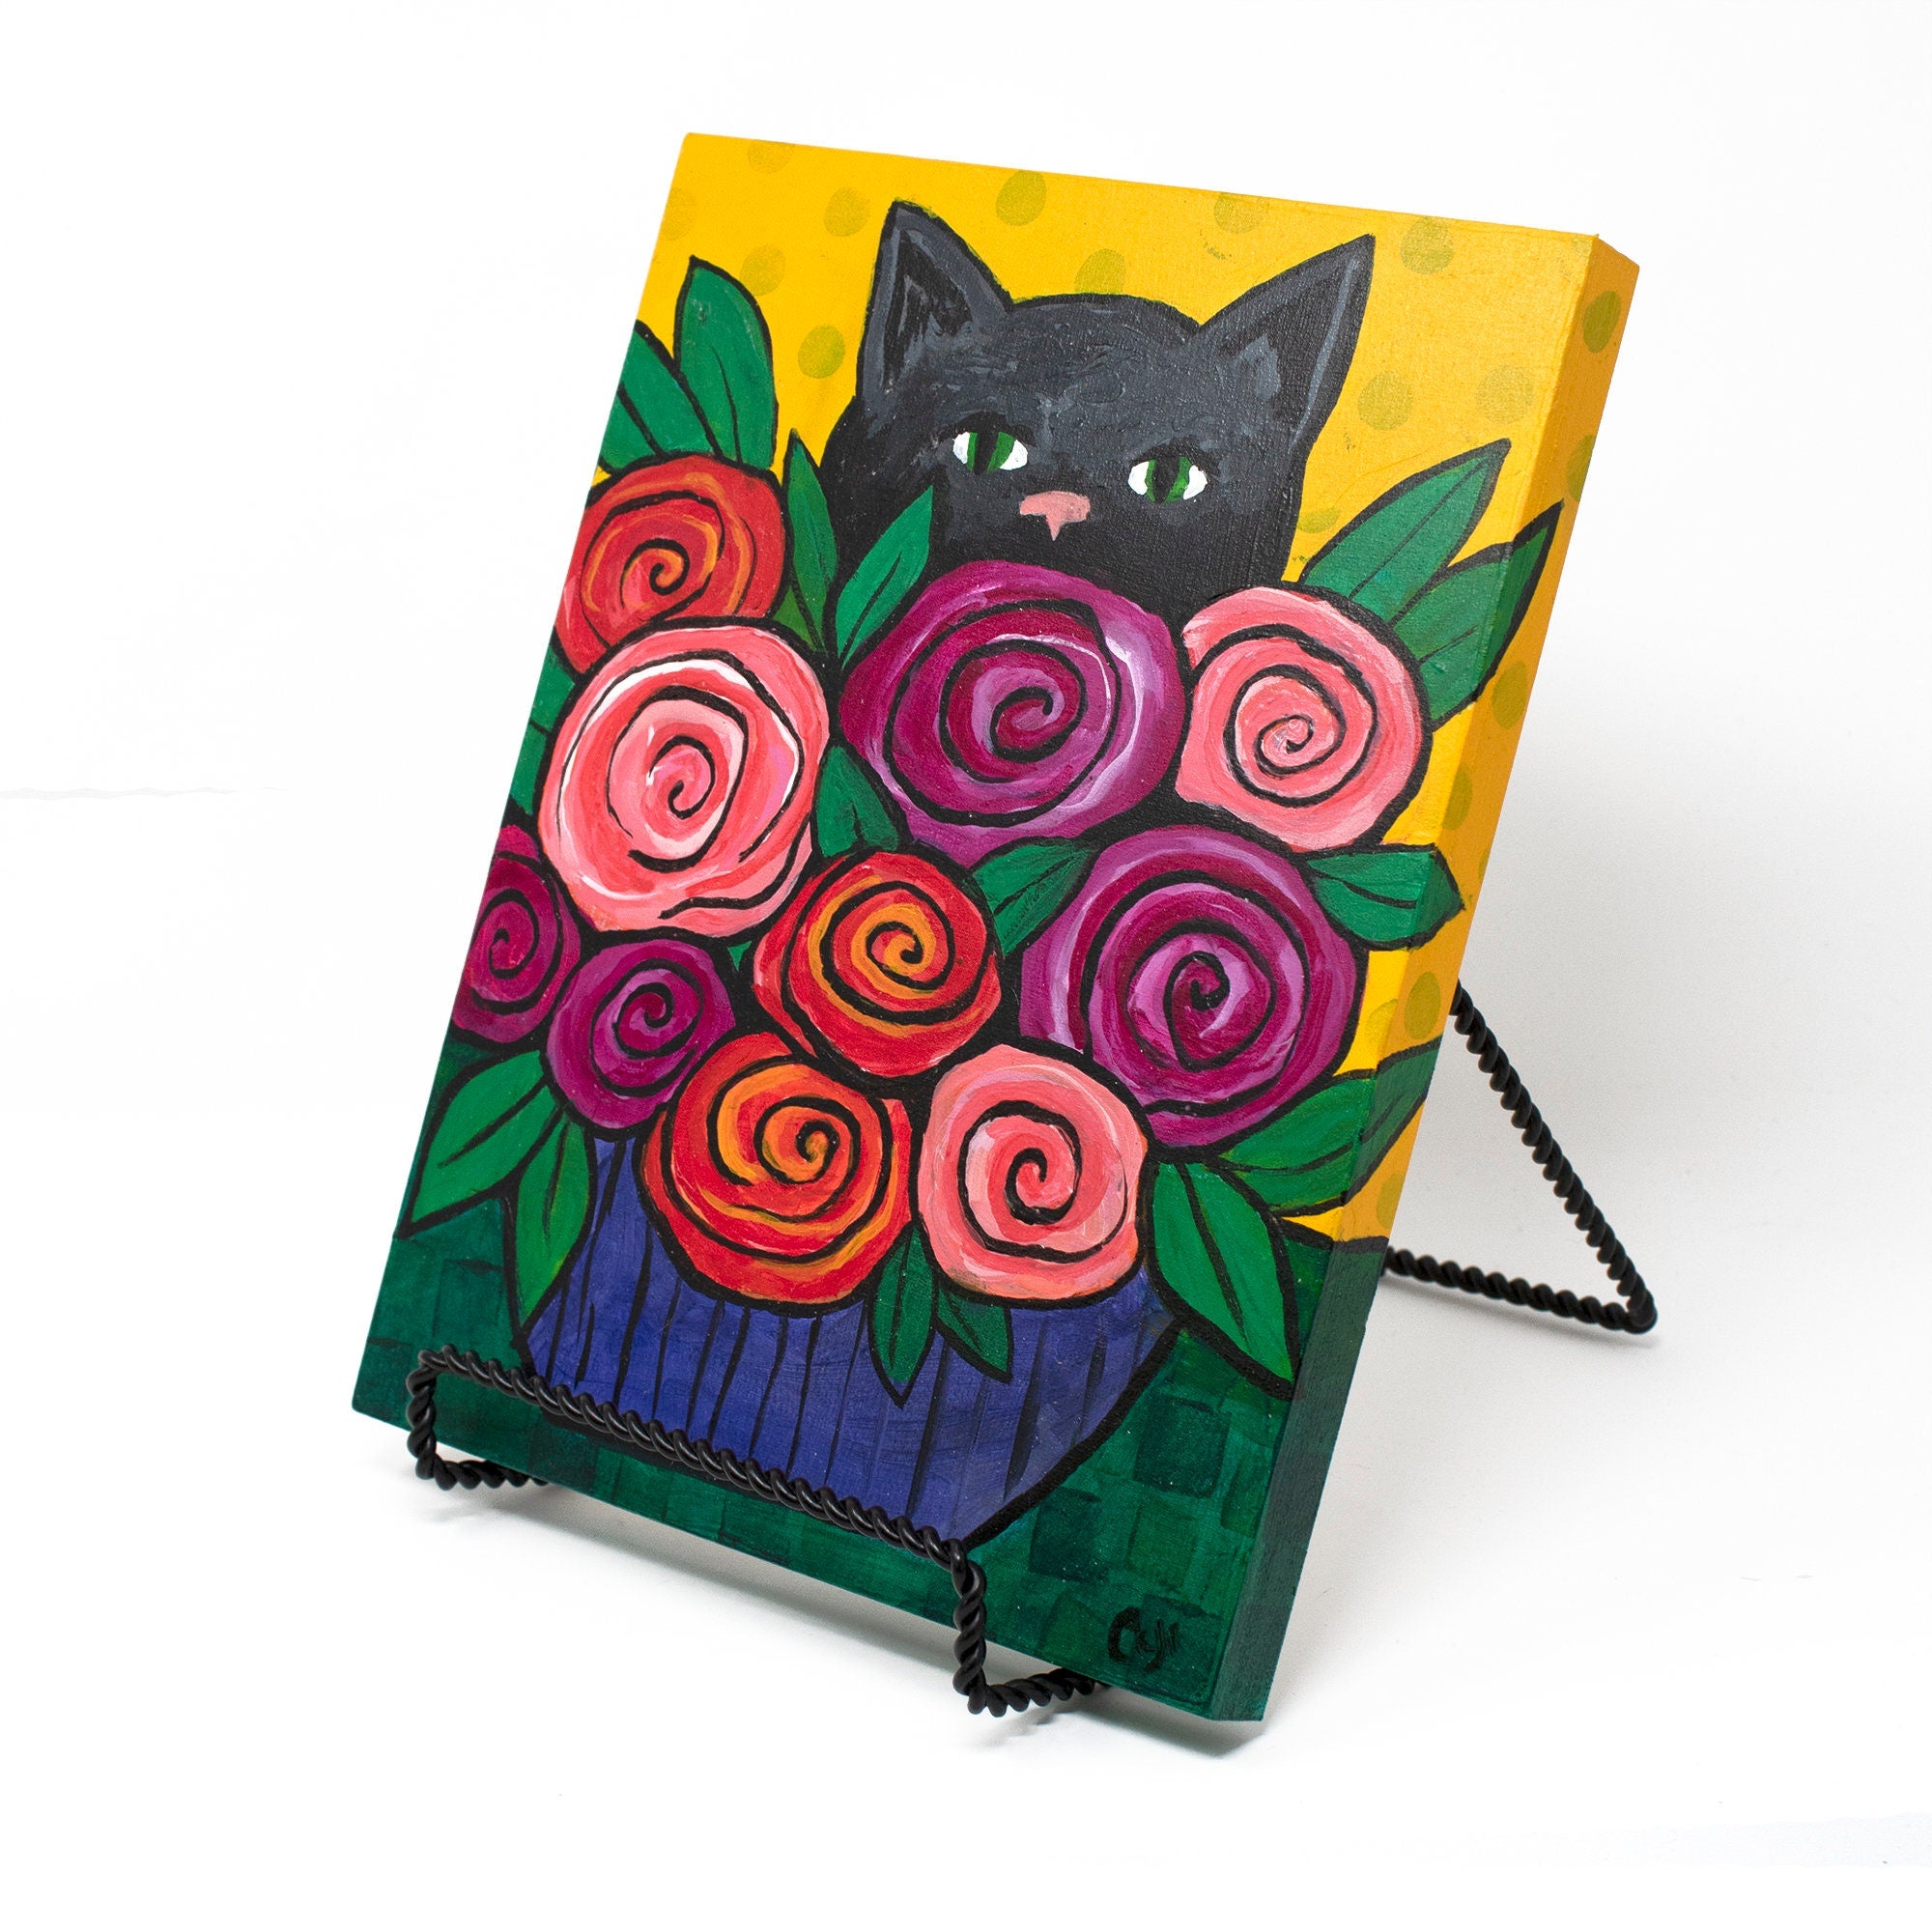 Black Cat with Flowers Painting - Original Rose Kitty Art - Colorful Cat Lover Gift